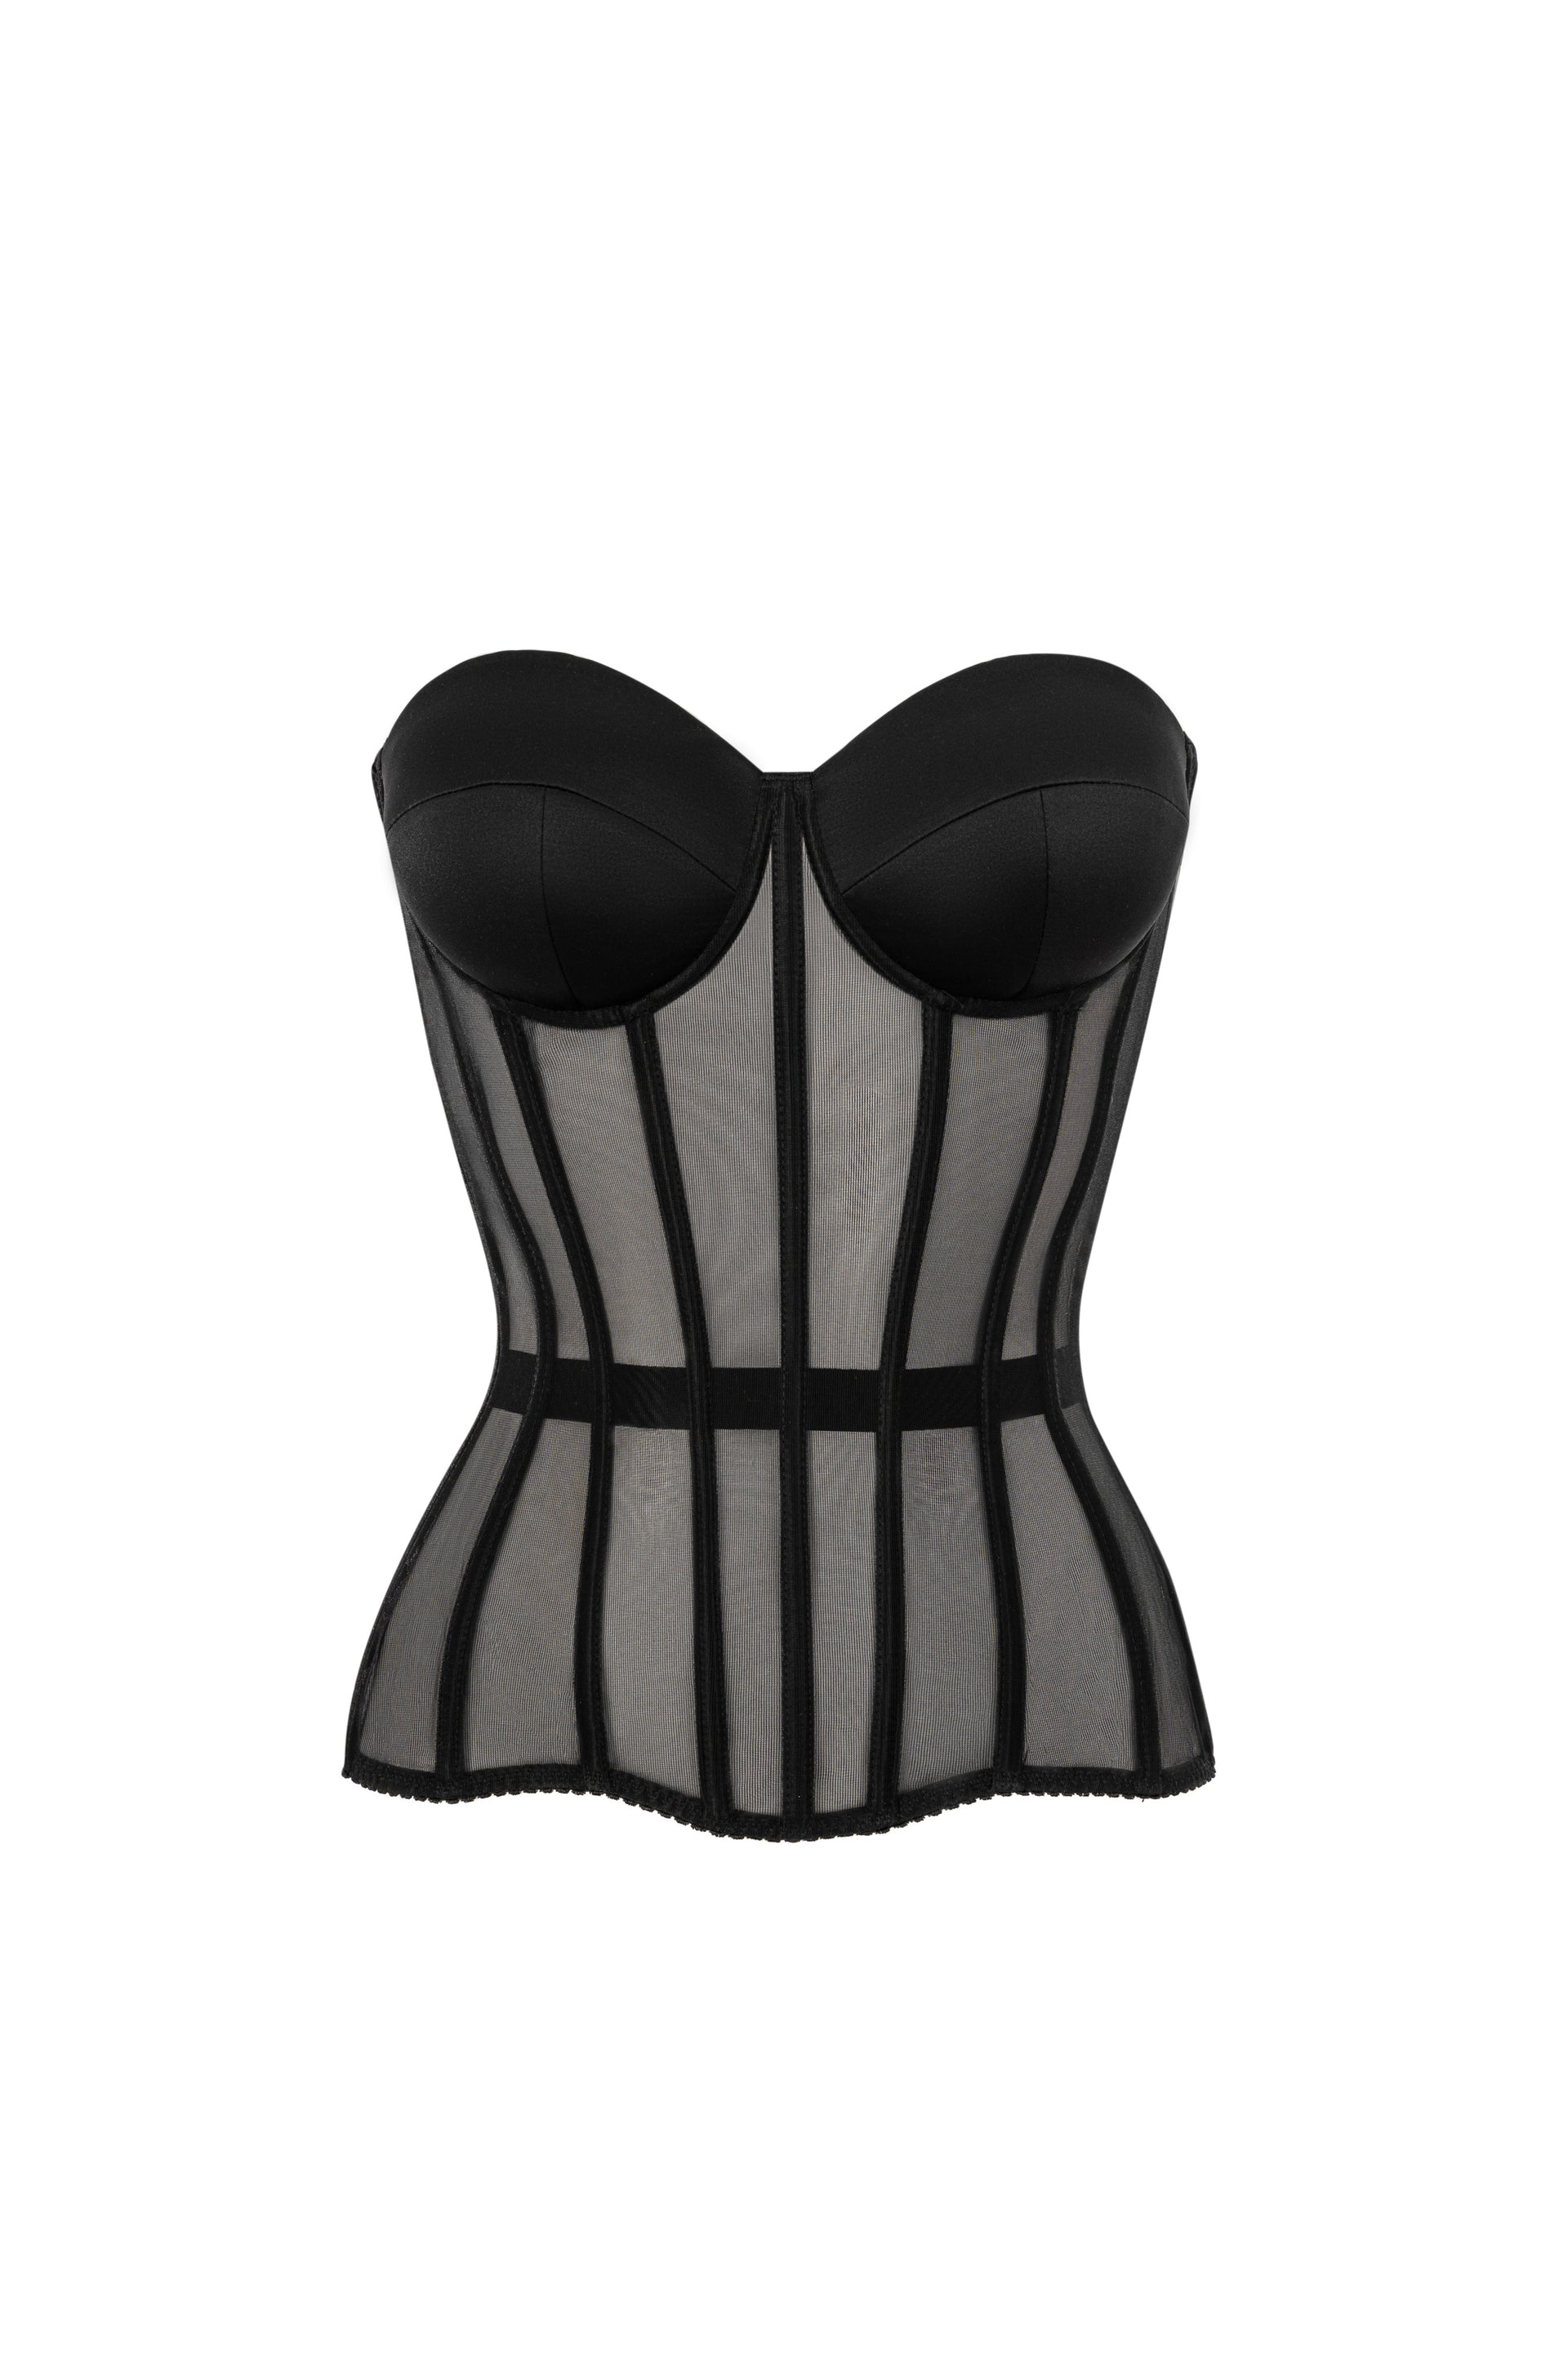 Black corset with cups - STATNAIA